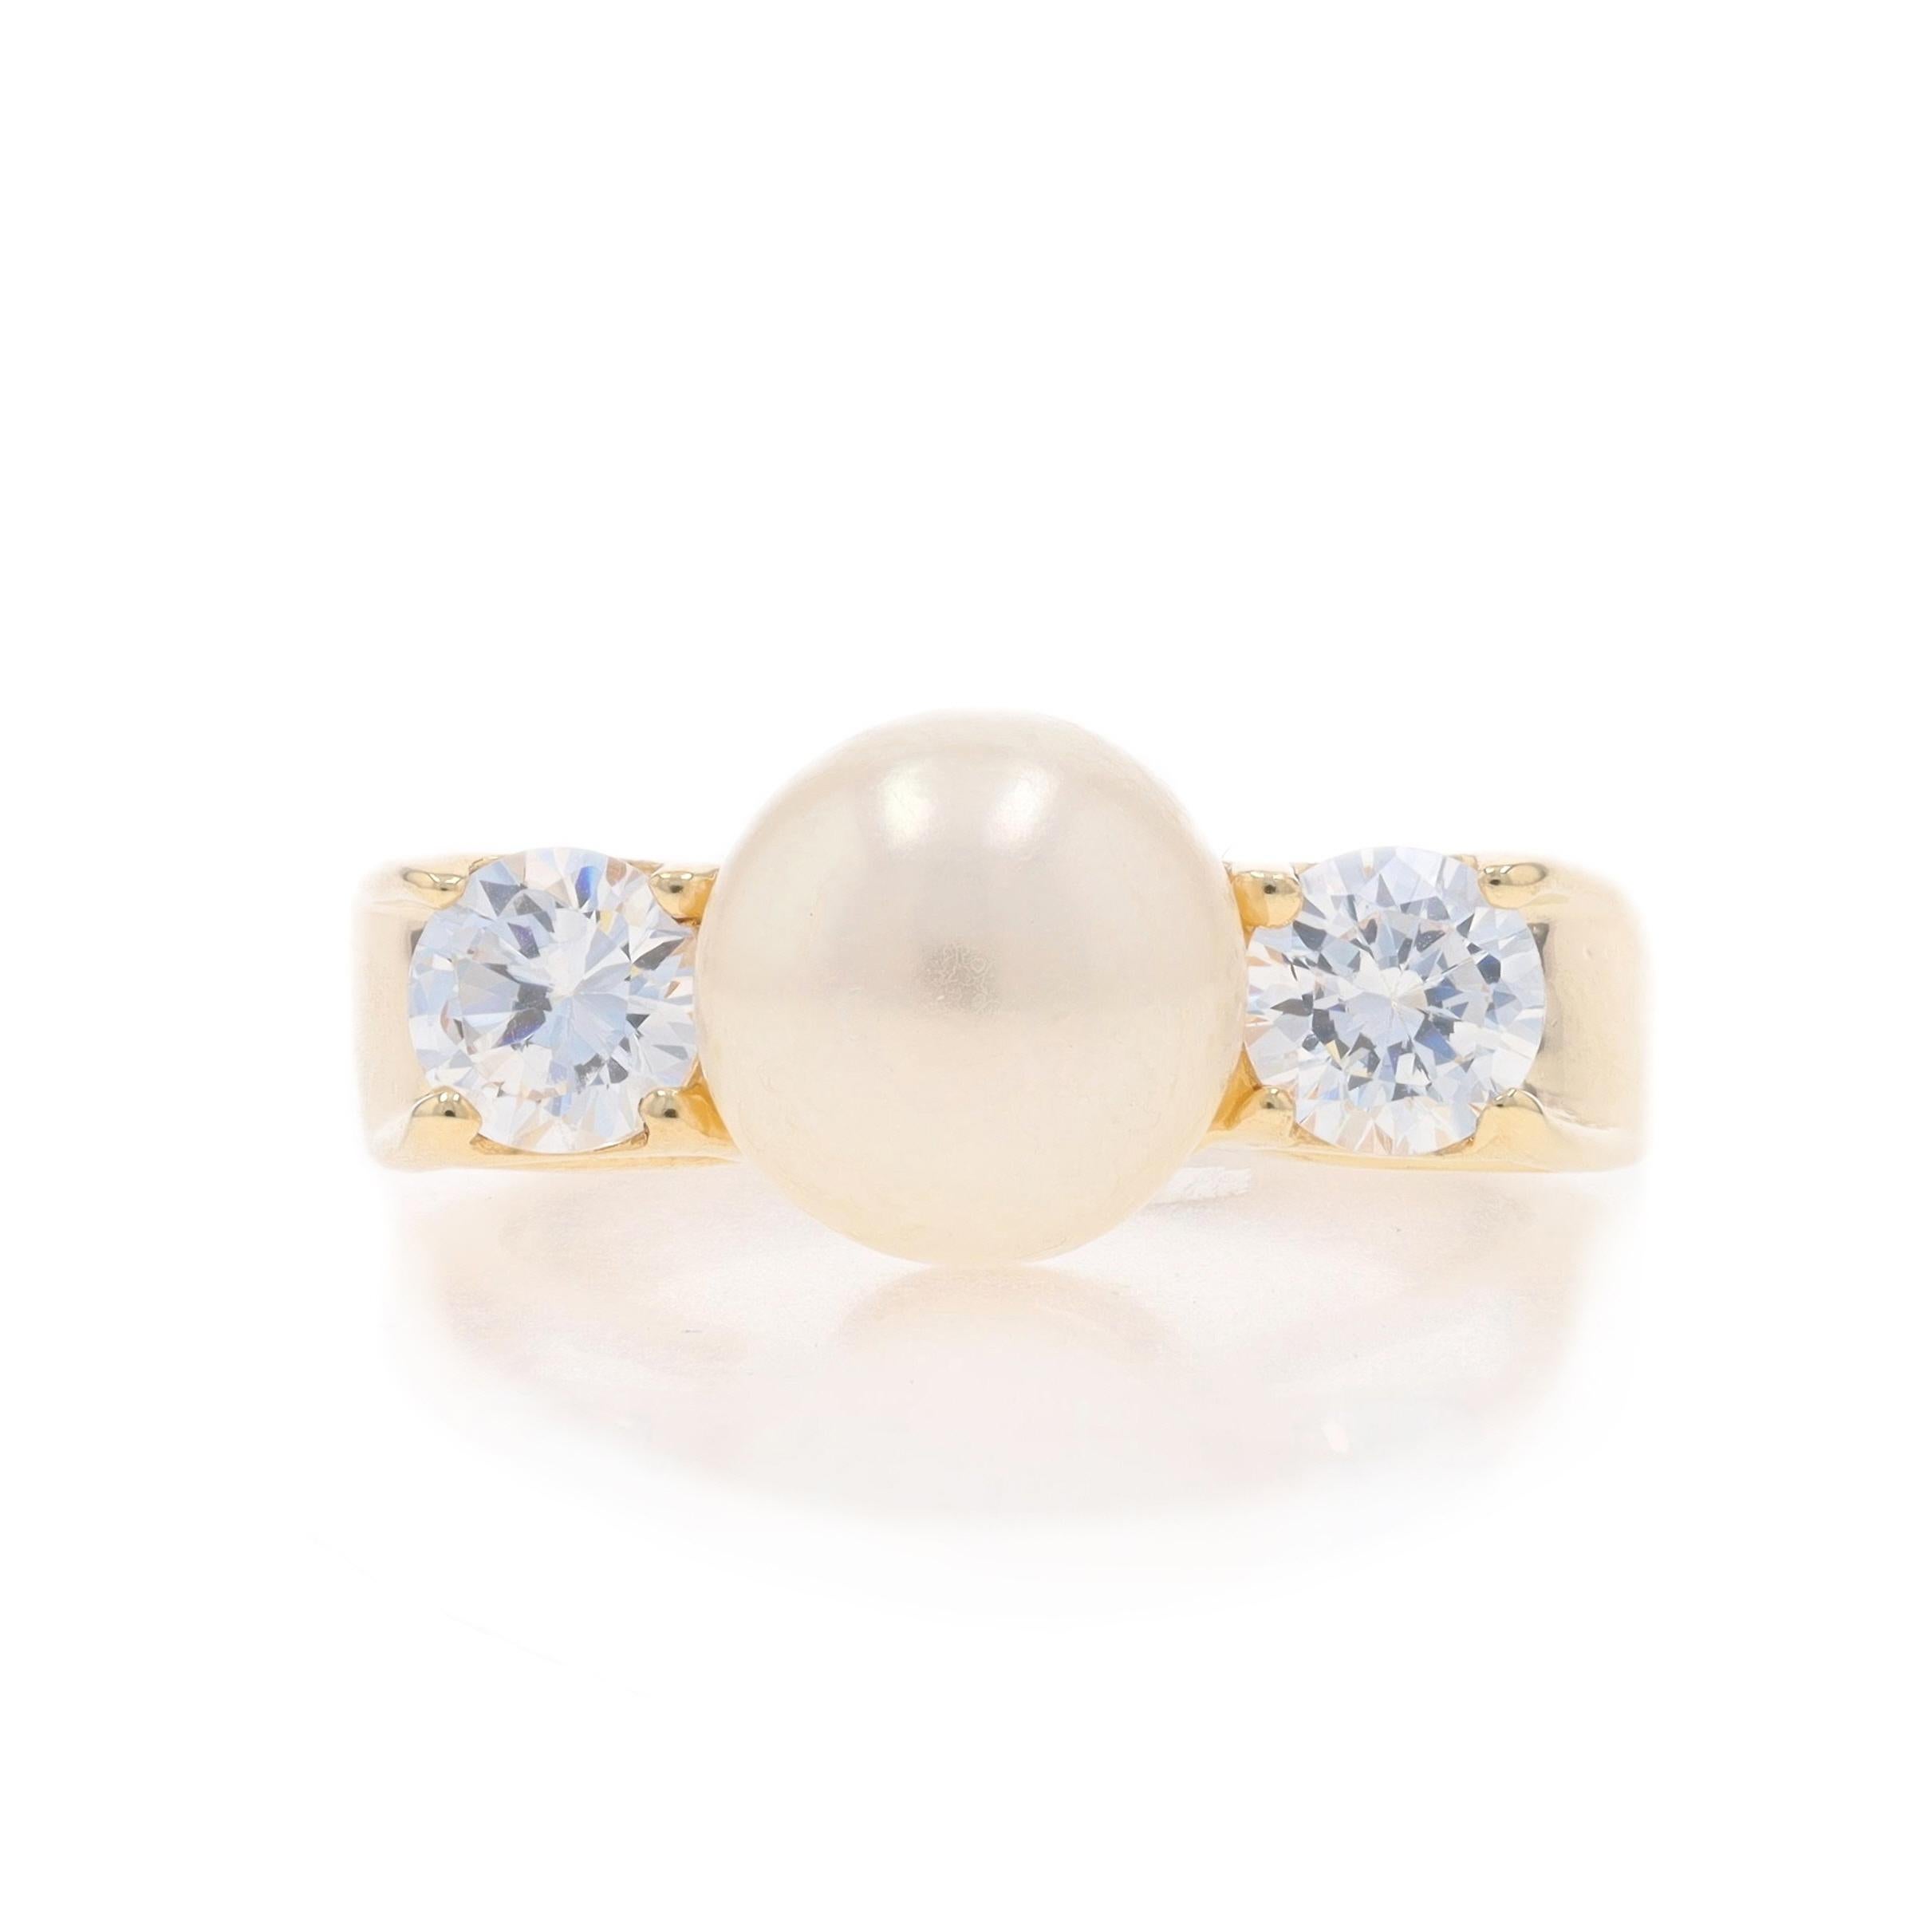 Size: 7
Sizing Fee: Up 1/2 a size for $30 or Down 1/2 a size for $30

Metal Content: 14k Yellow Gold

Stone Information

Cultured Pearl
Size: 9mm

Cubic Zirconias
Carat(s): 1.00ctw dew
Cut: Round Brilliant
Color: Clear

Total Carats: 1.00ctw

Style: